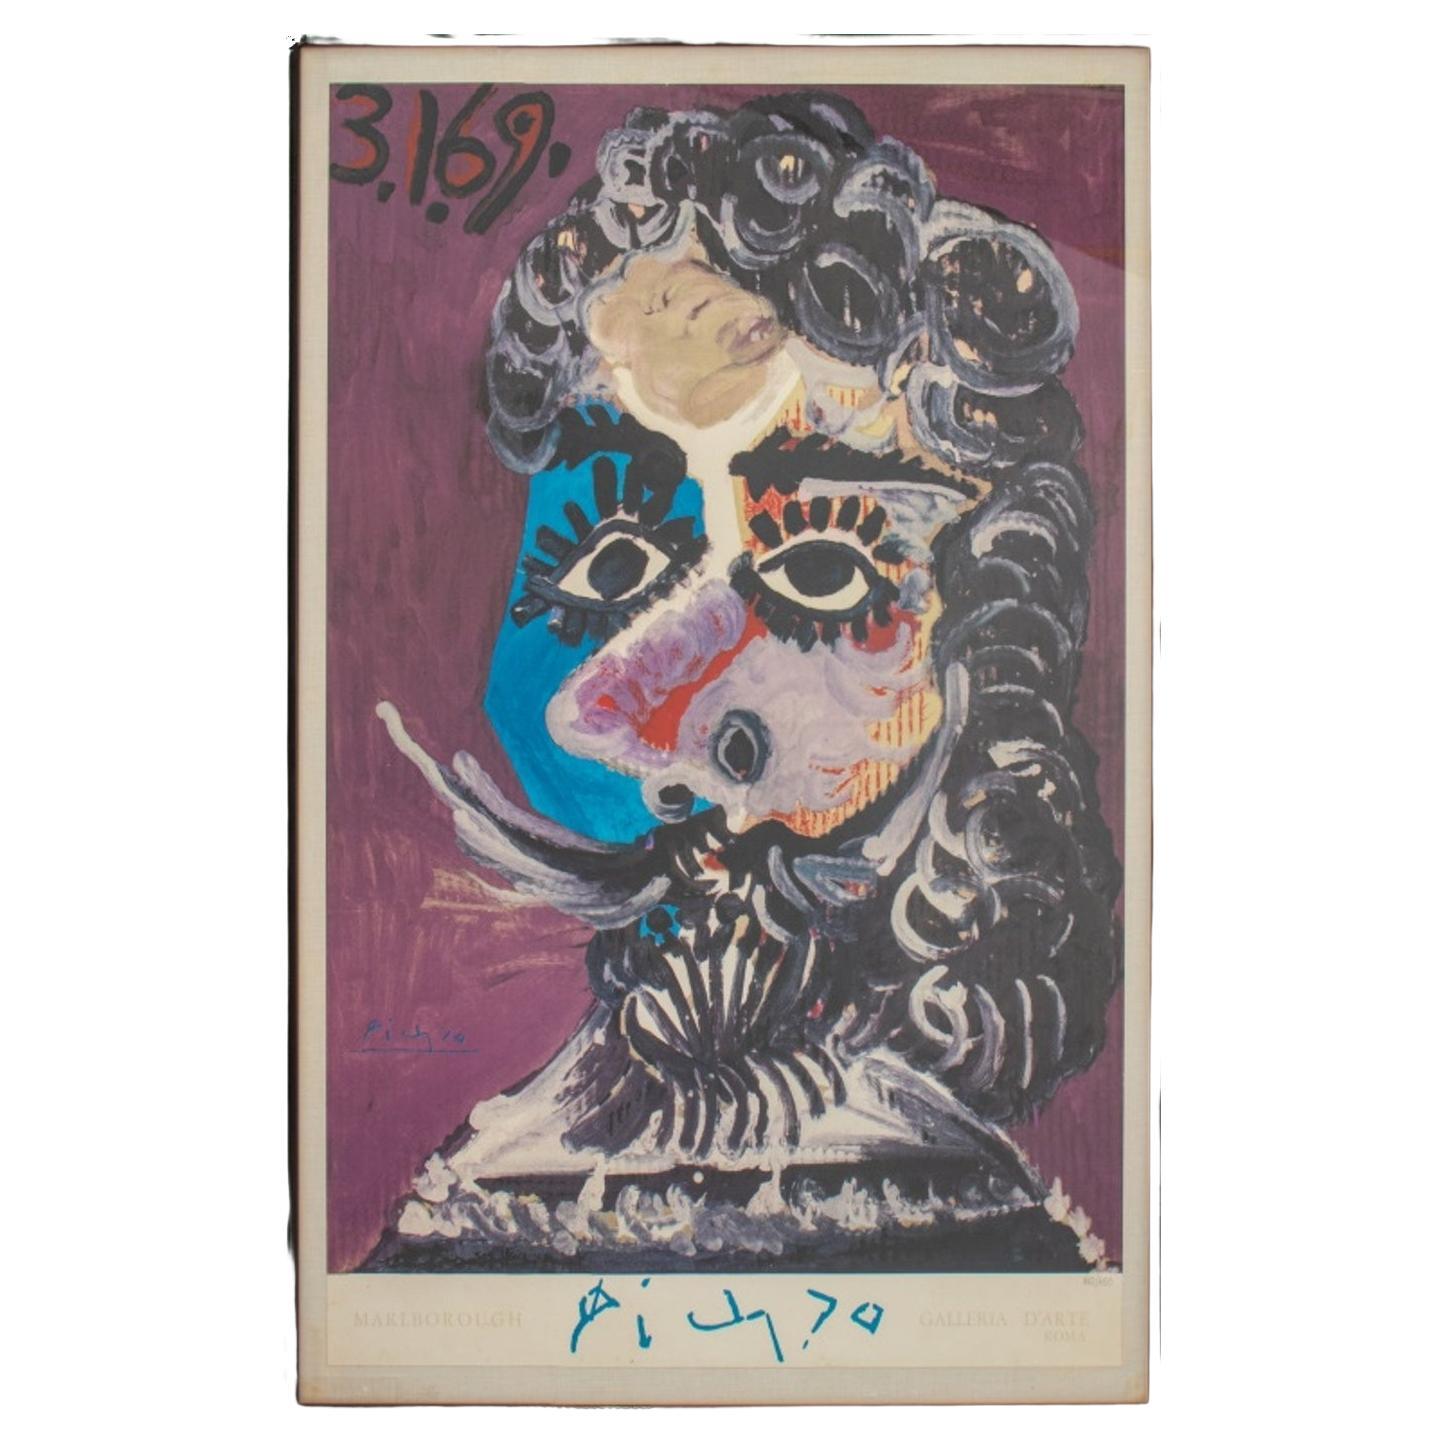 Pablo PIcasso "Earl of Marlborough" Poster Lithograph